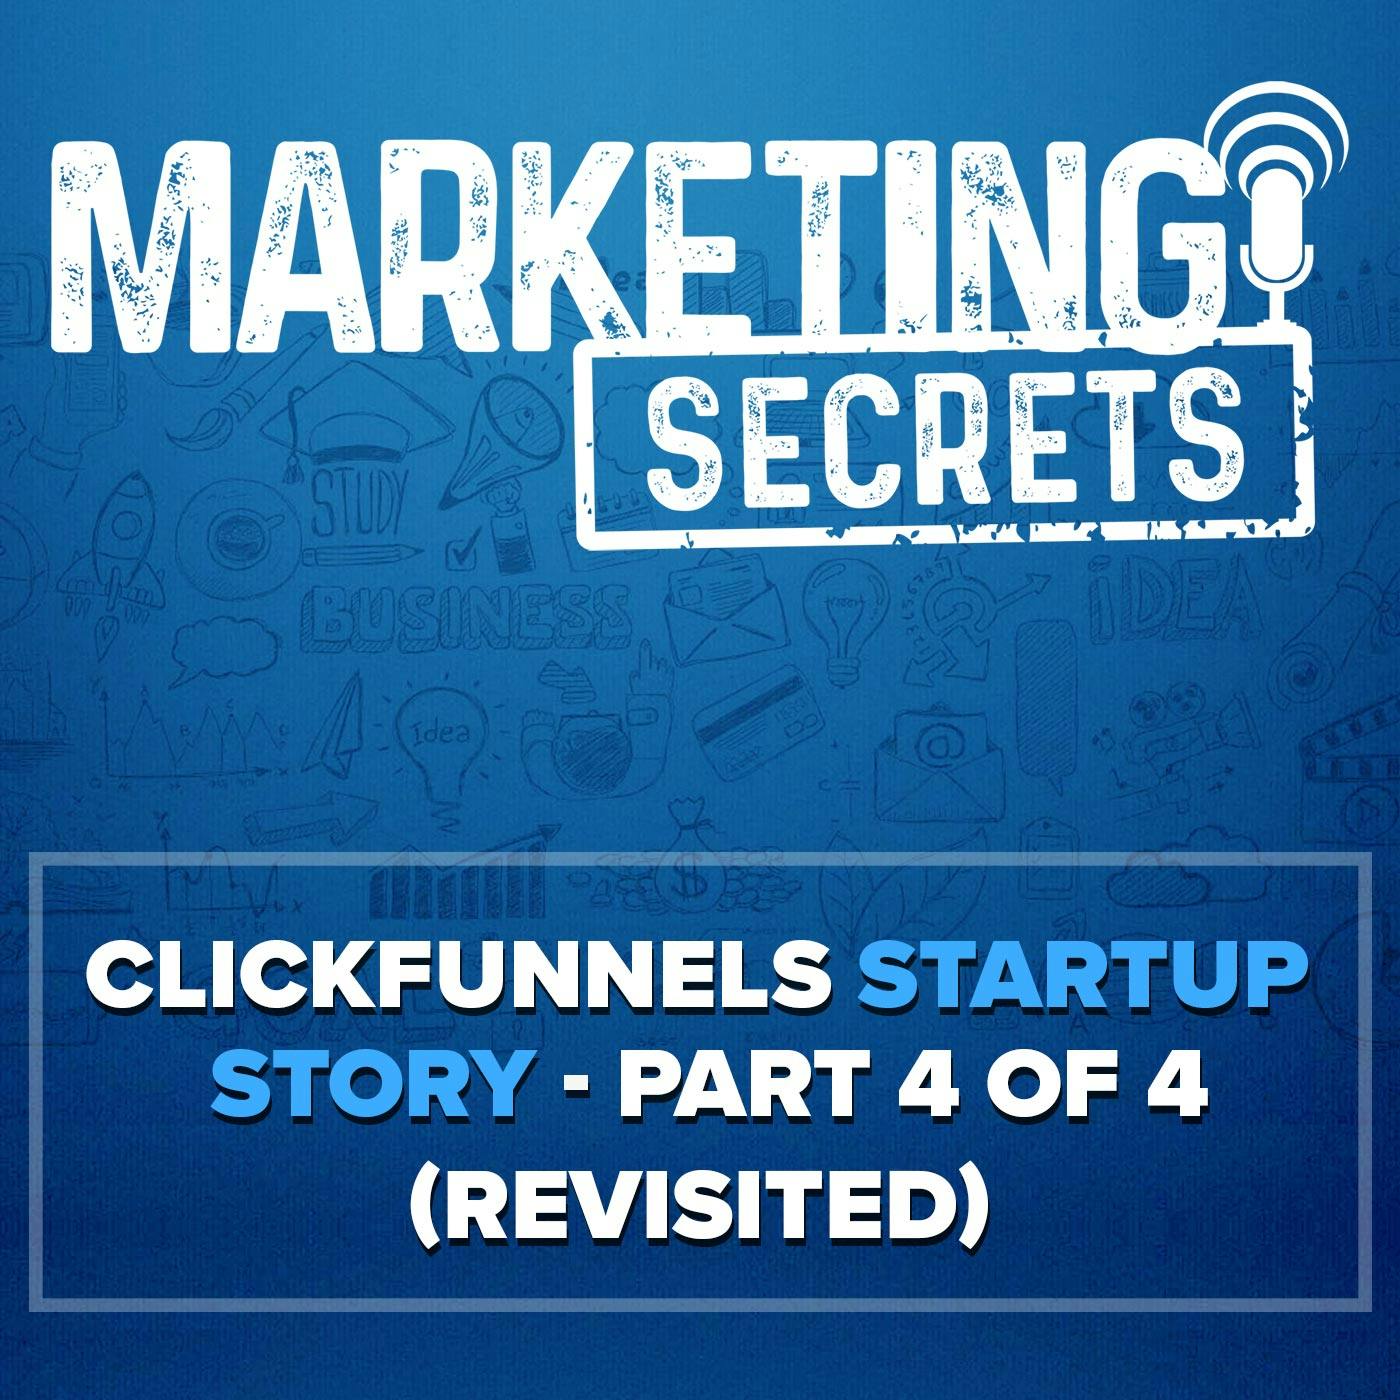 ClickFunnels Startup Story - Part 4 of 4 (Revisited!)